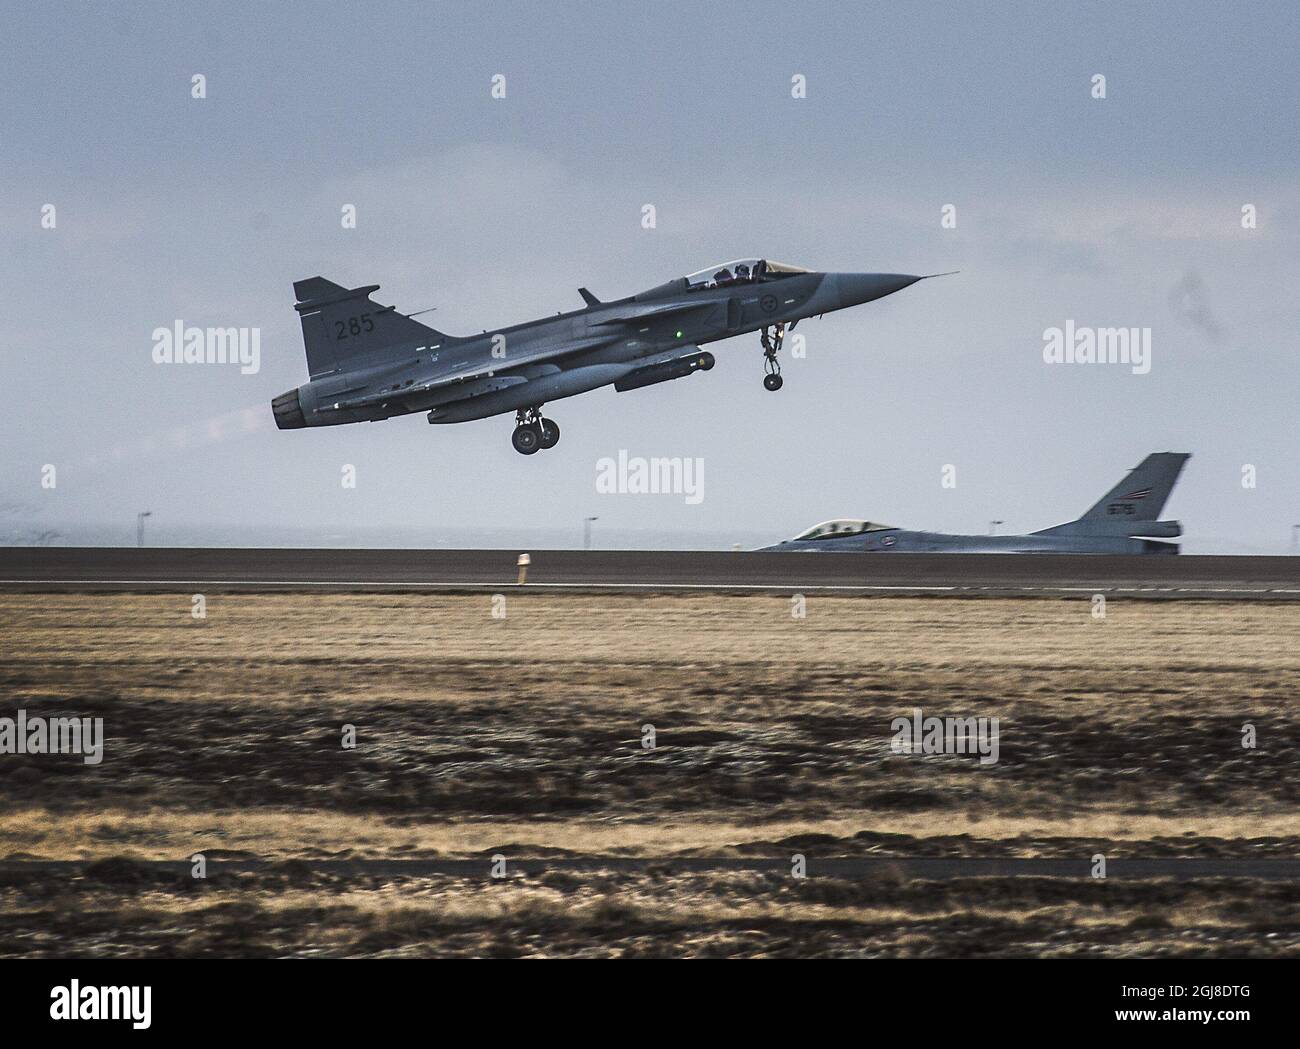 ik ben trots knop Op grote schaal For your files* ICELAND2014-03-24 * Photo date 2014-02-12* A Swedish Airforce  JAS Gripen interceptor is see in during the NATO exercise Iceland Air Meet  in Iceland in February 2014 Foto: Yvonne Asell /